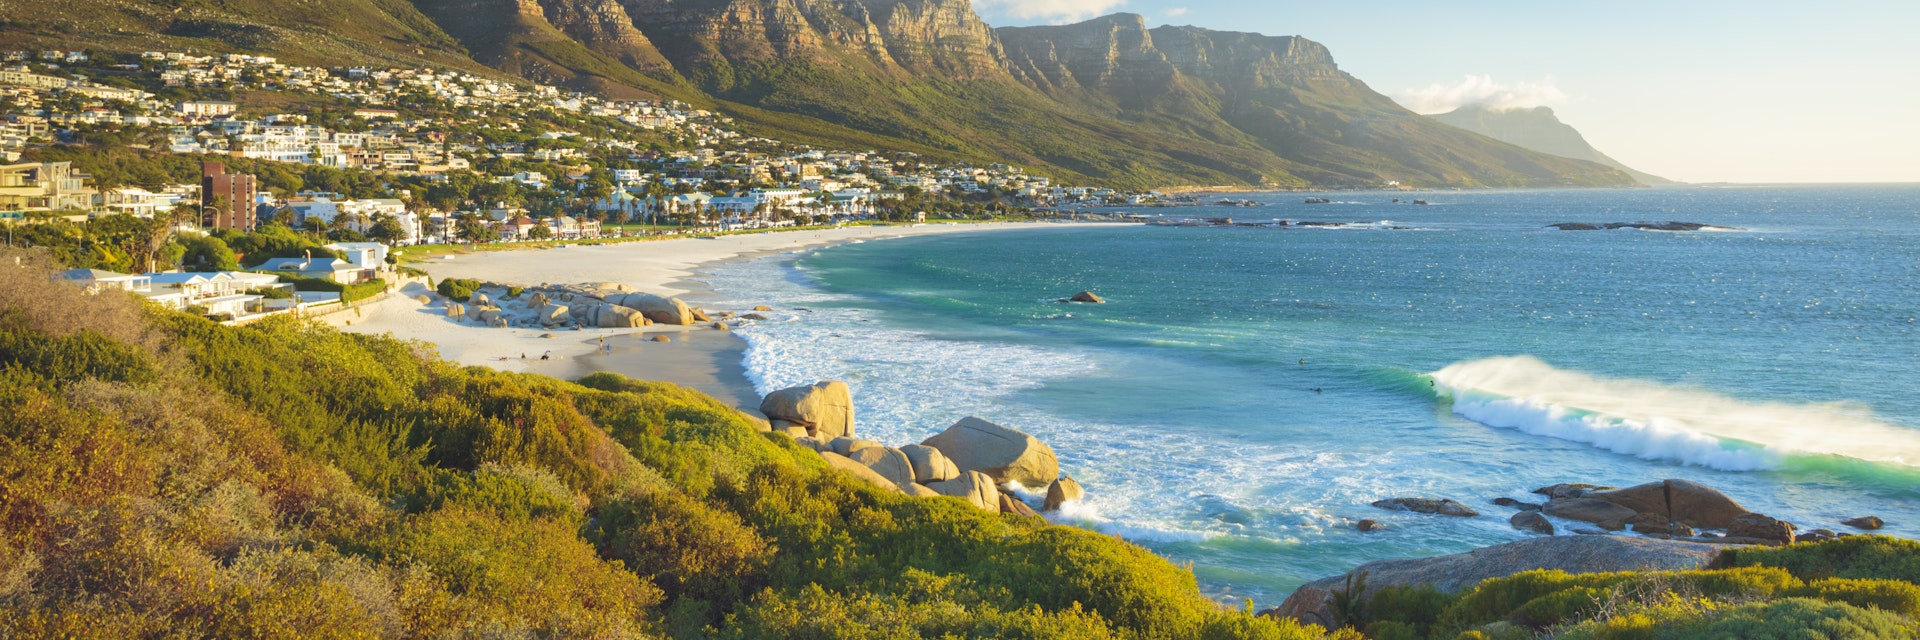 View of the beach and Twelve Apostles mountain in Camps Bay near Cape Town in South Africa.